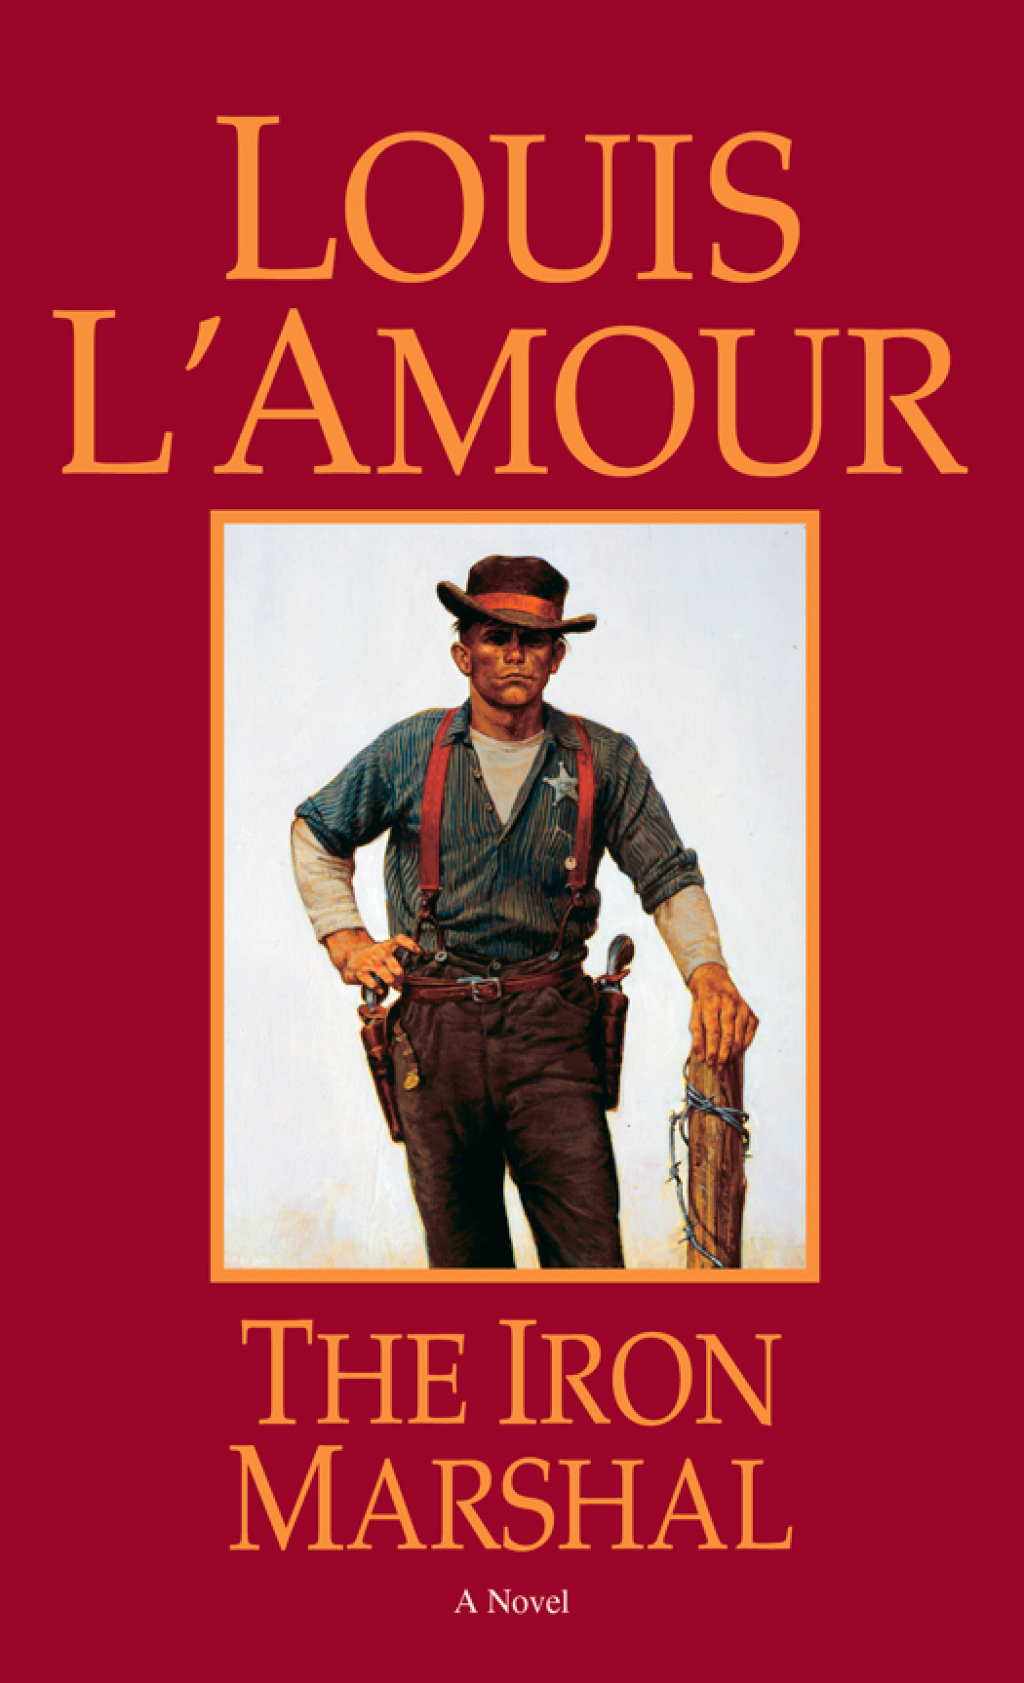 Iron Marshal Louis L'Amour Author